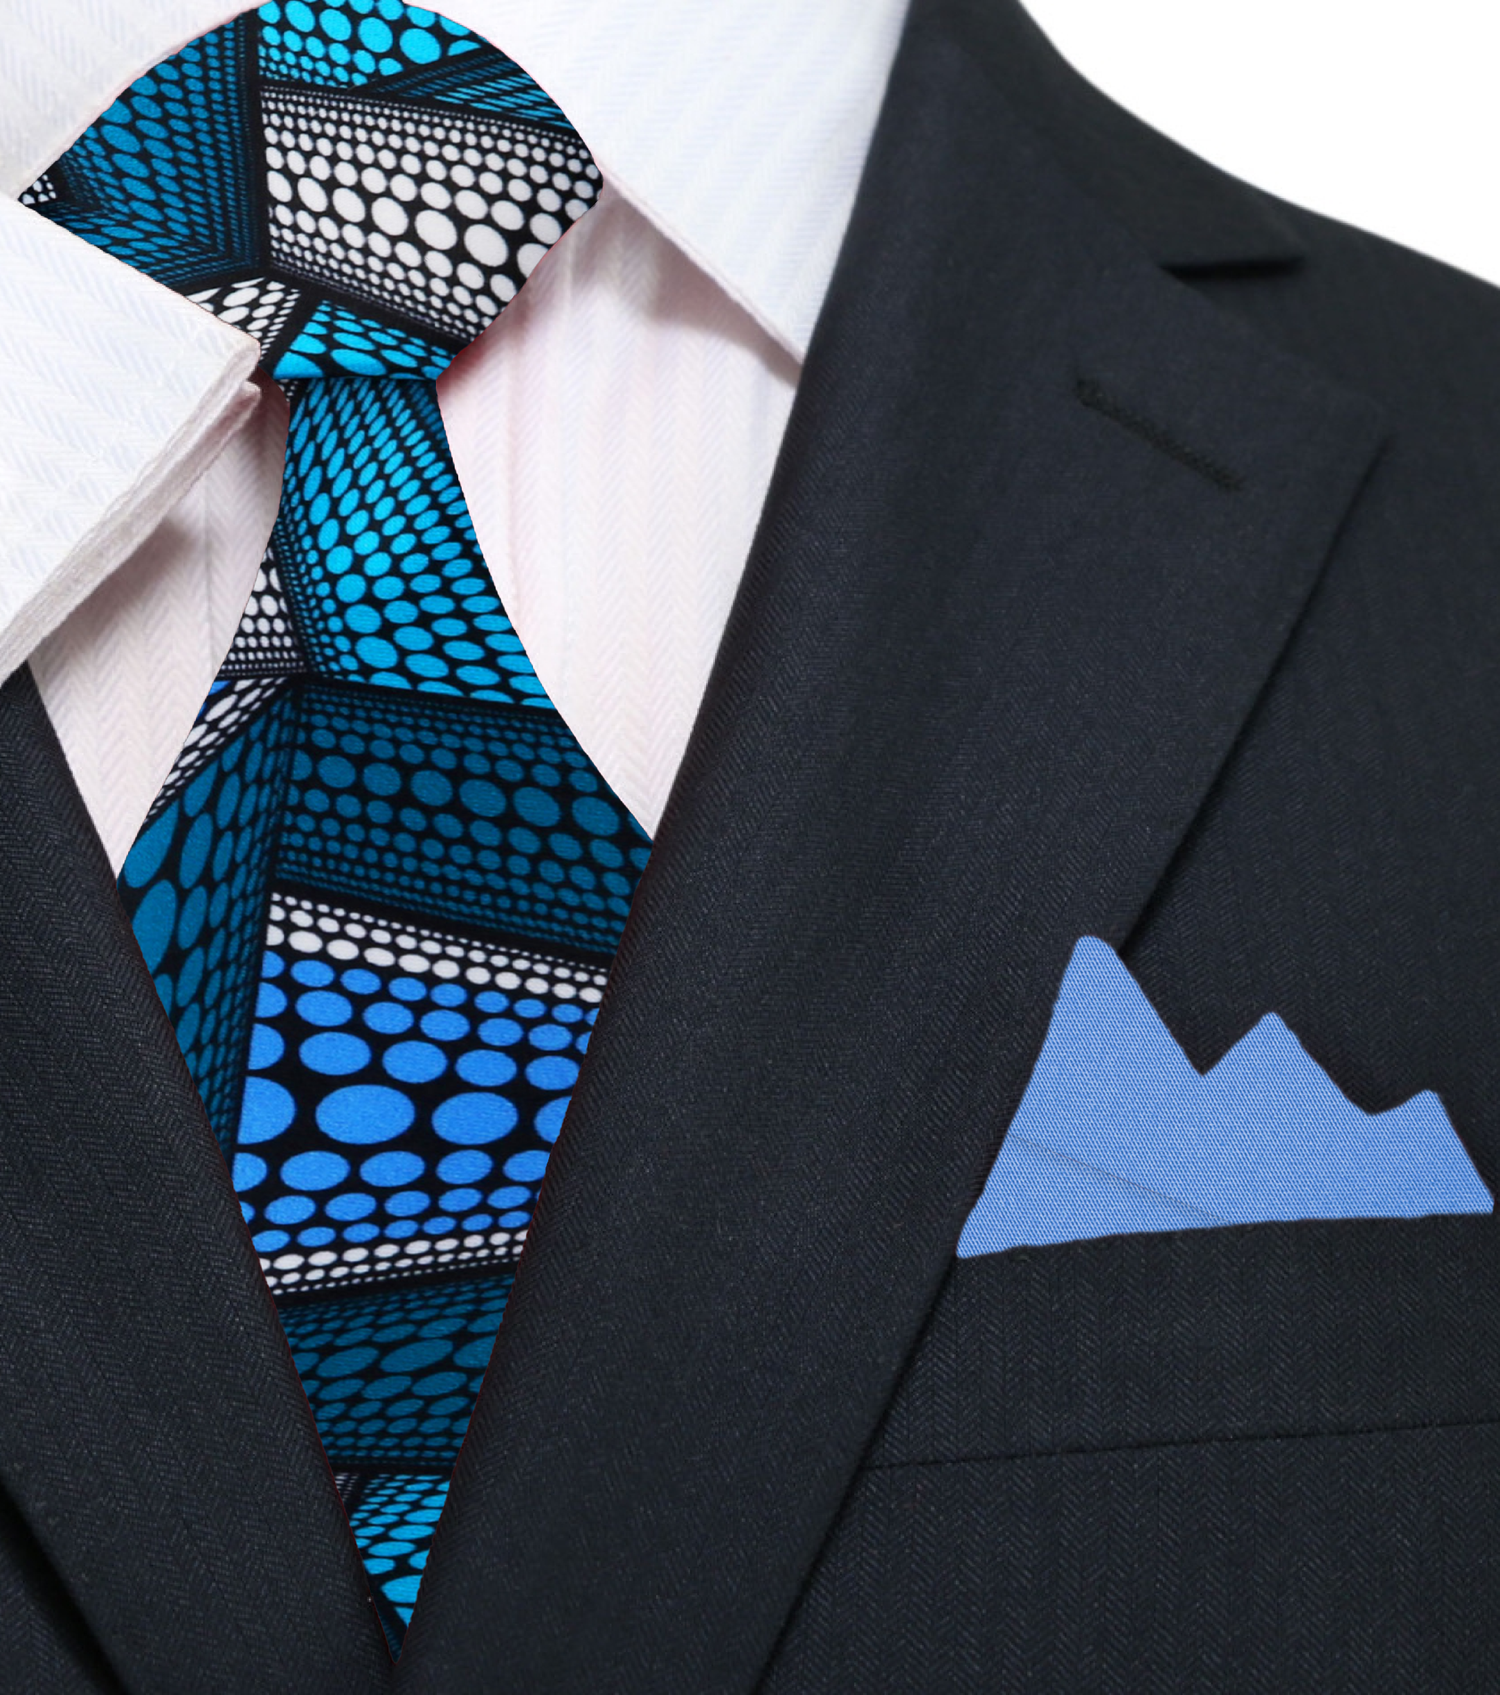 An Abstract Blue and White Necktie and Light Blue Square